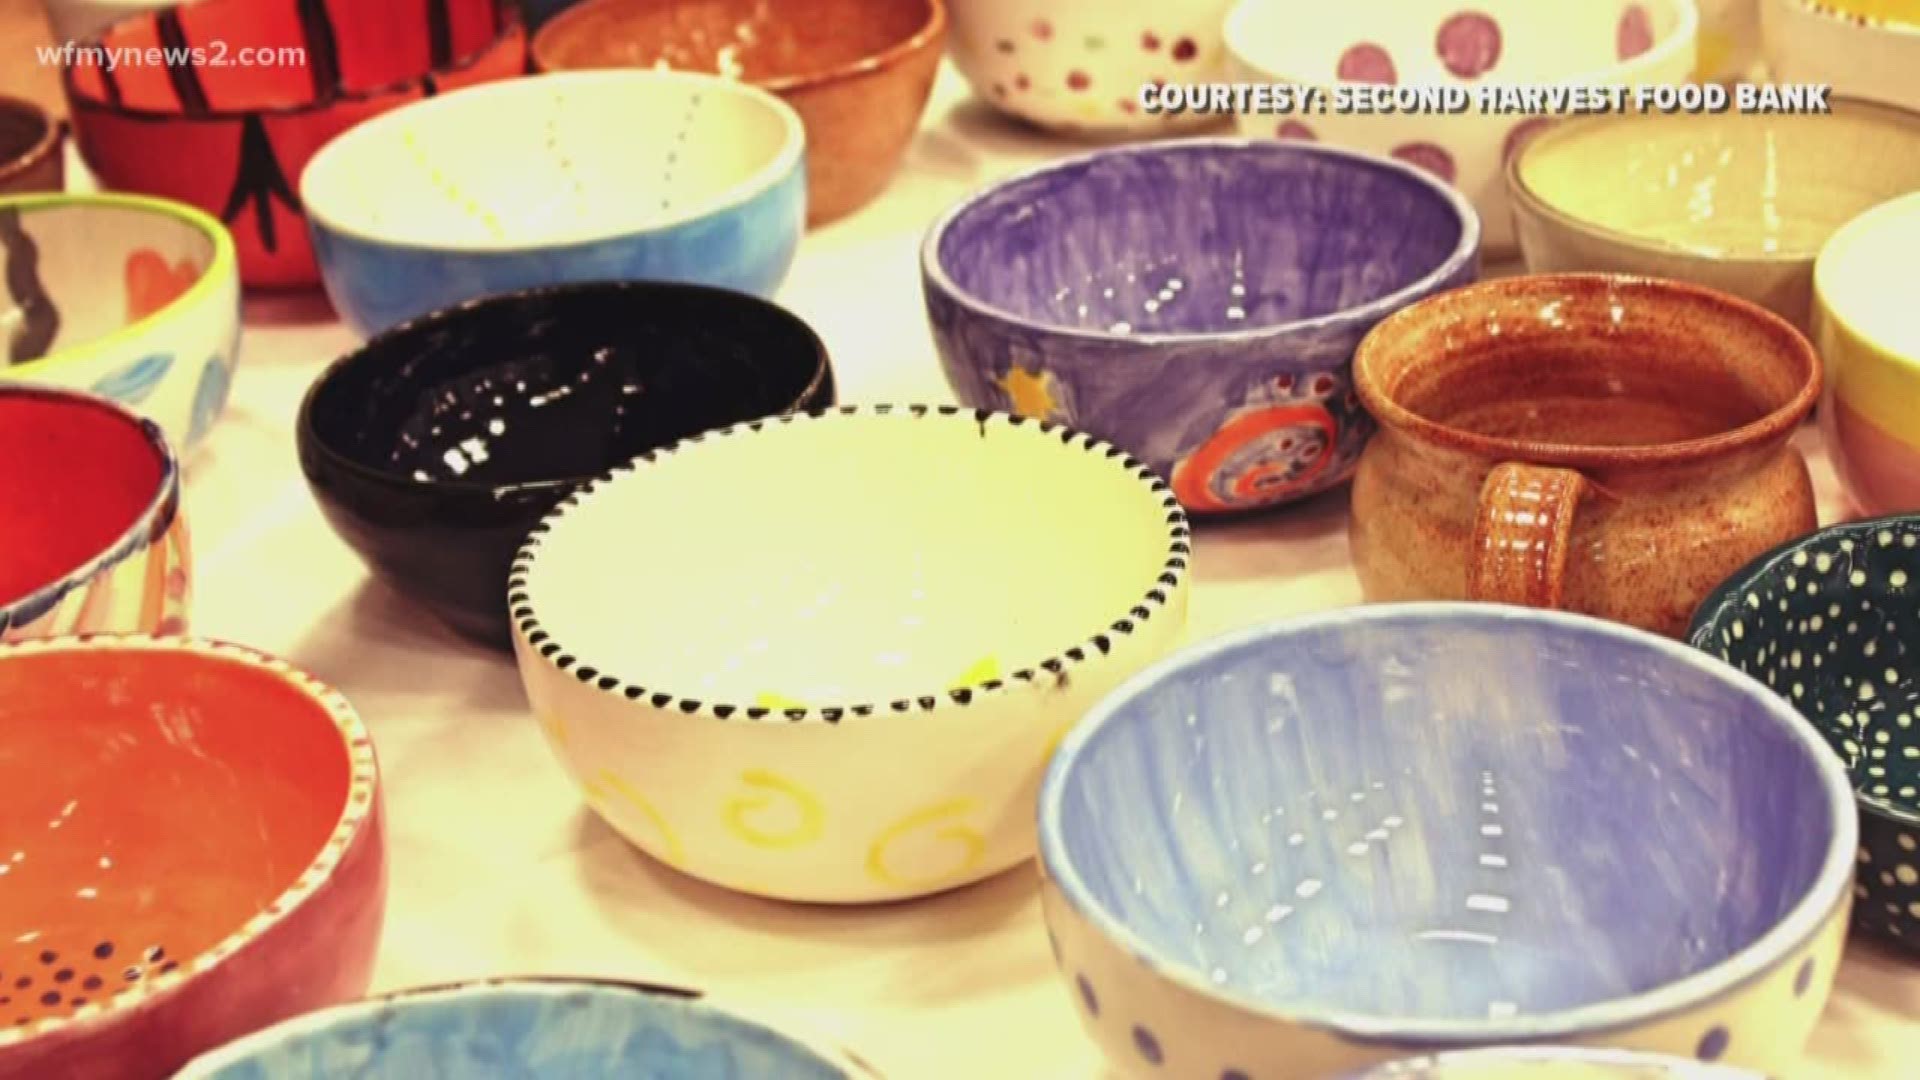 Second harvest food bank's annual Empty Bowls event is tonight and tomorrow. Local restaurants donate pots of their signature soups, and local potters donate handcrafted bowls.